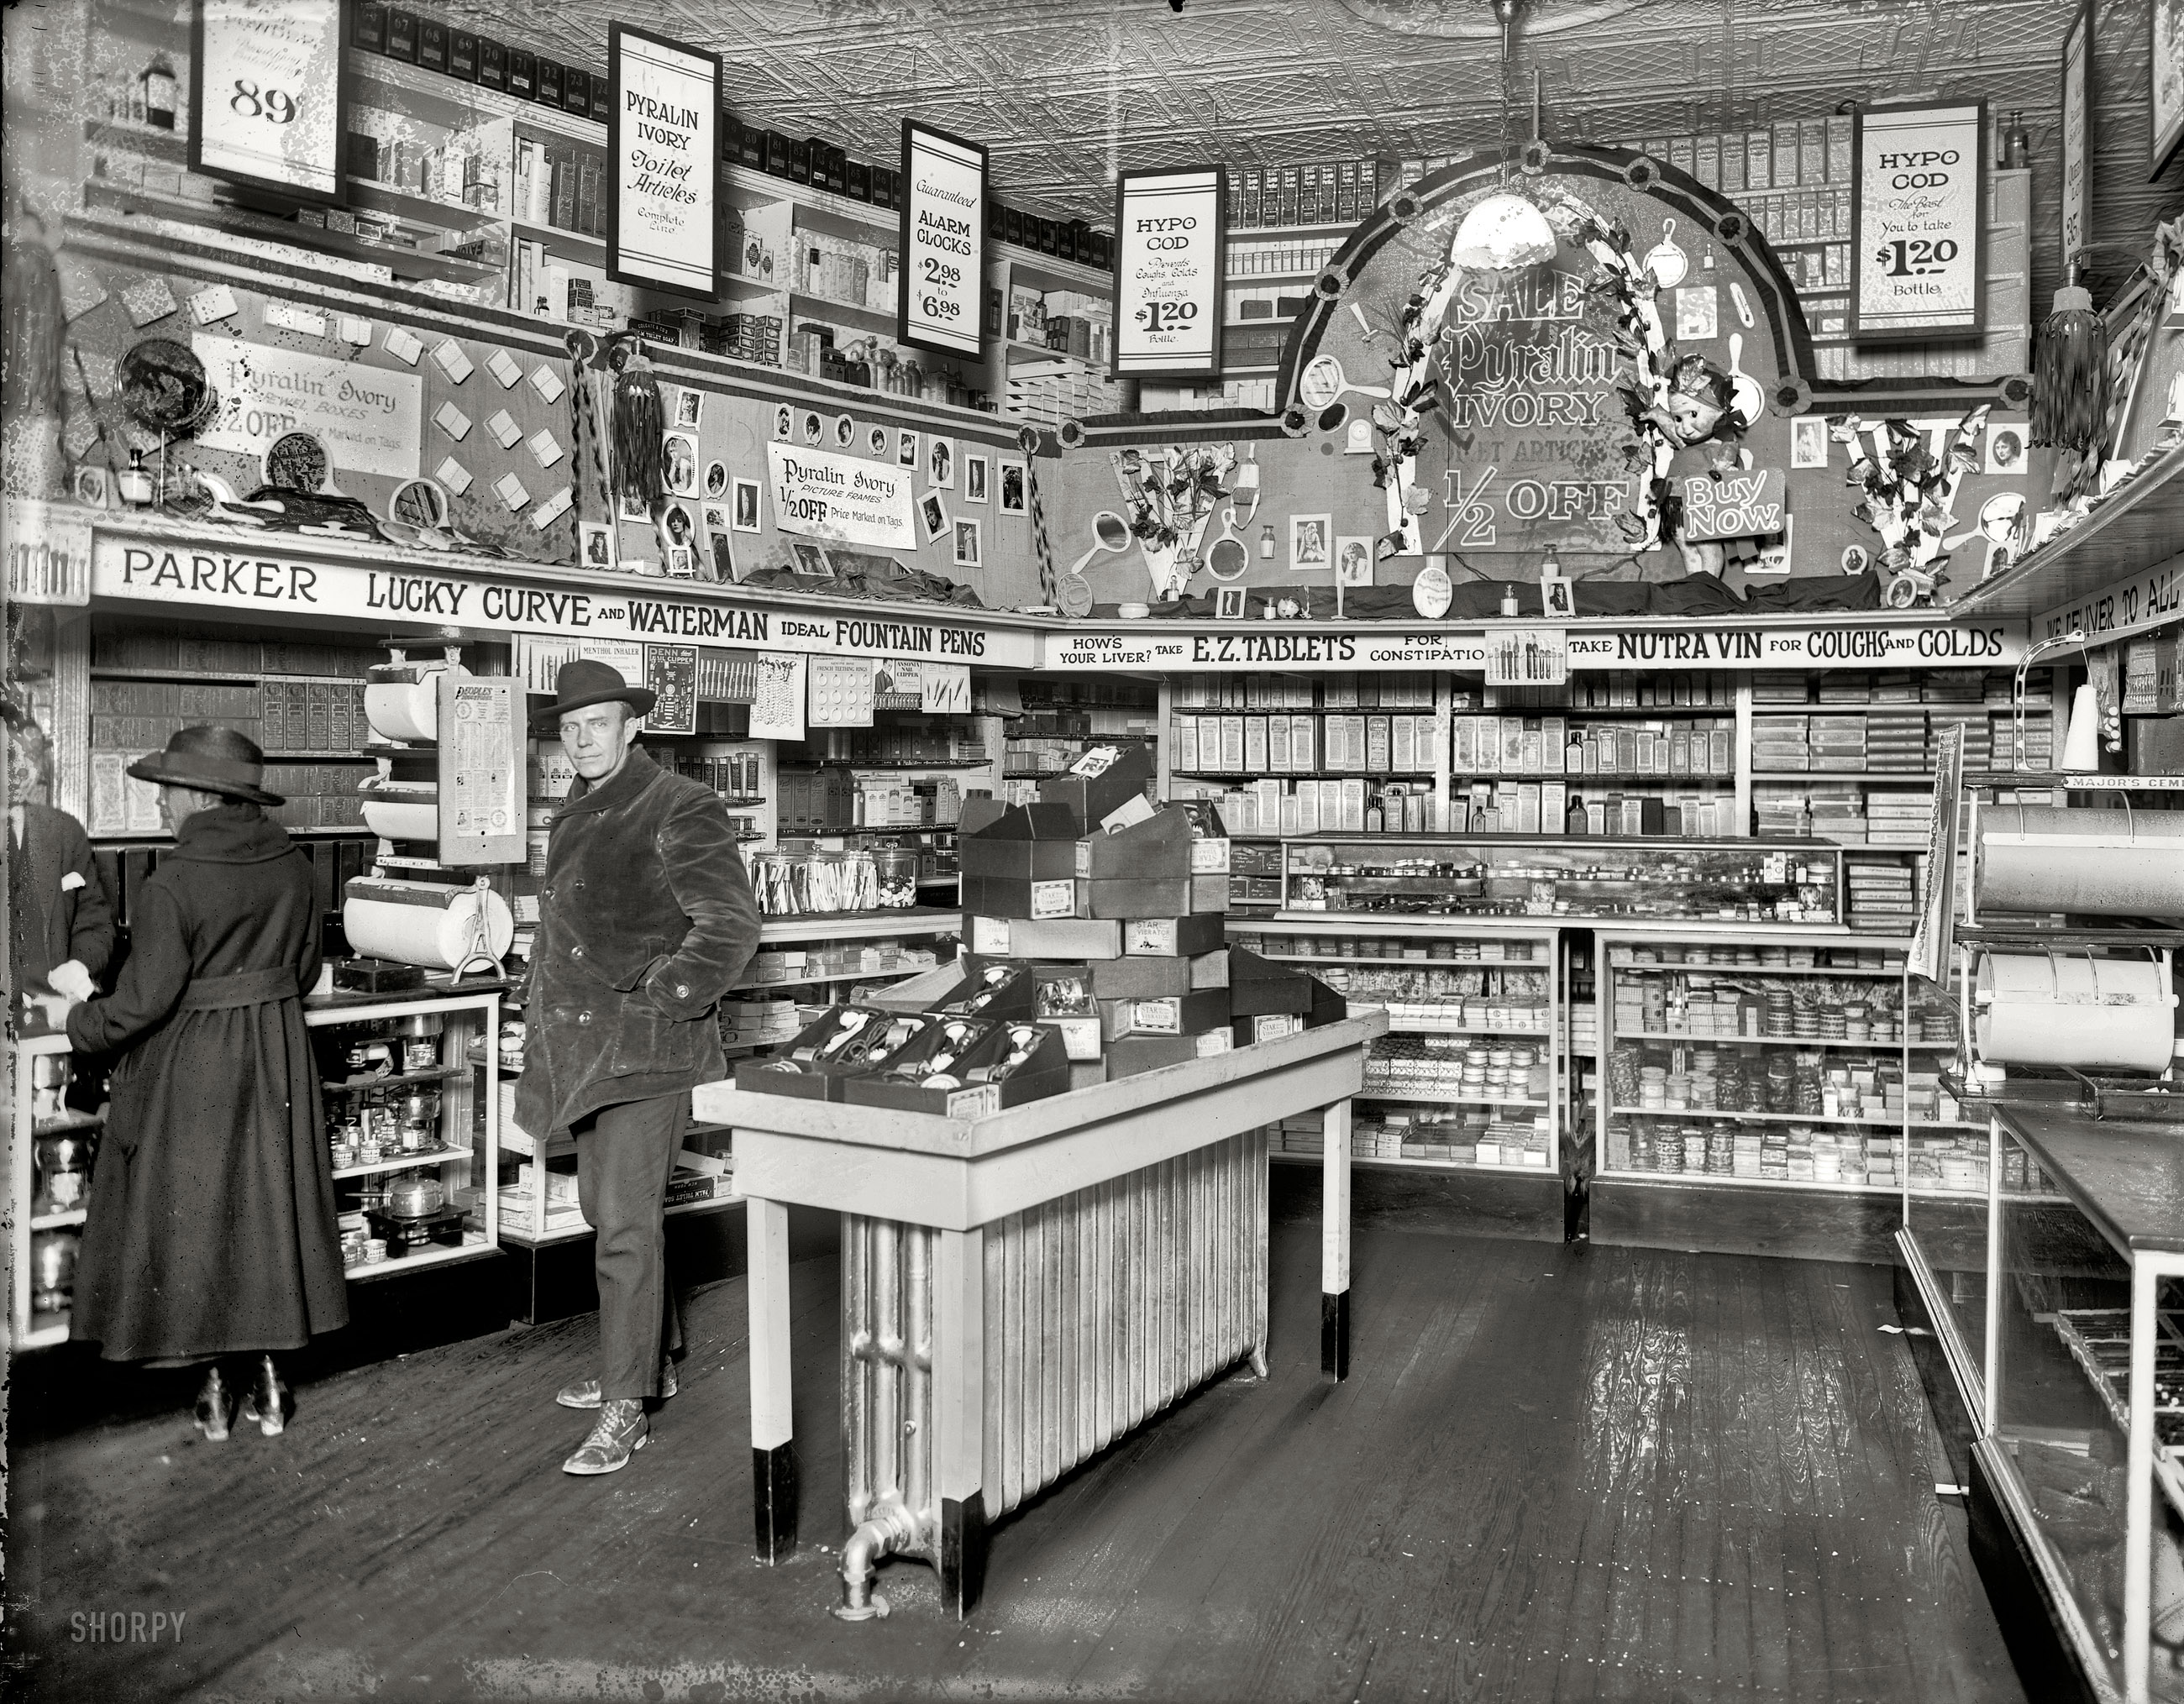 1921 or 1922. "People's Drug Store, 7th and K." On the table: a nice assortment of Star vibrators. This is a new version of a photo originally posted Aug. 15, 2007. In what counts as an exciting curatorial development here at Shorpy, the glass negative is now available for this image (a.k.a. "the vibrator photo"), as opposed to the previous version made from the scan of a print. The new version is a lot sharper, and shows more of the store. The caption info also gives the address, which we didn't have last year. National Photo glass negative. View full size.